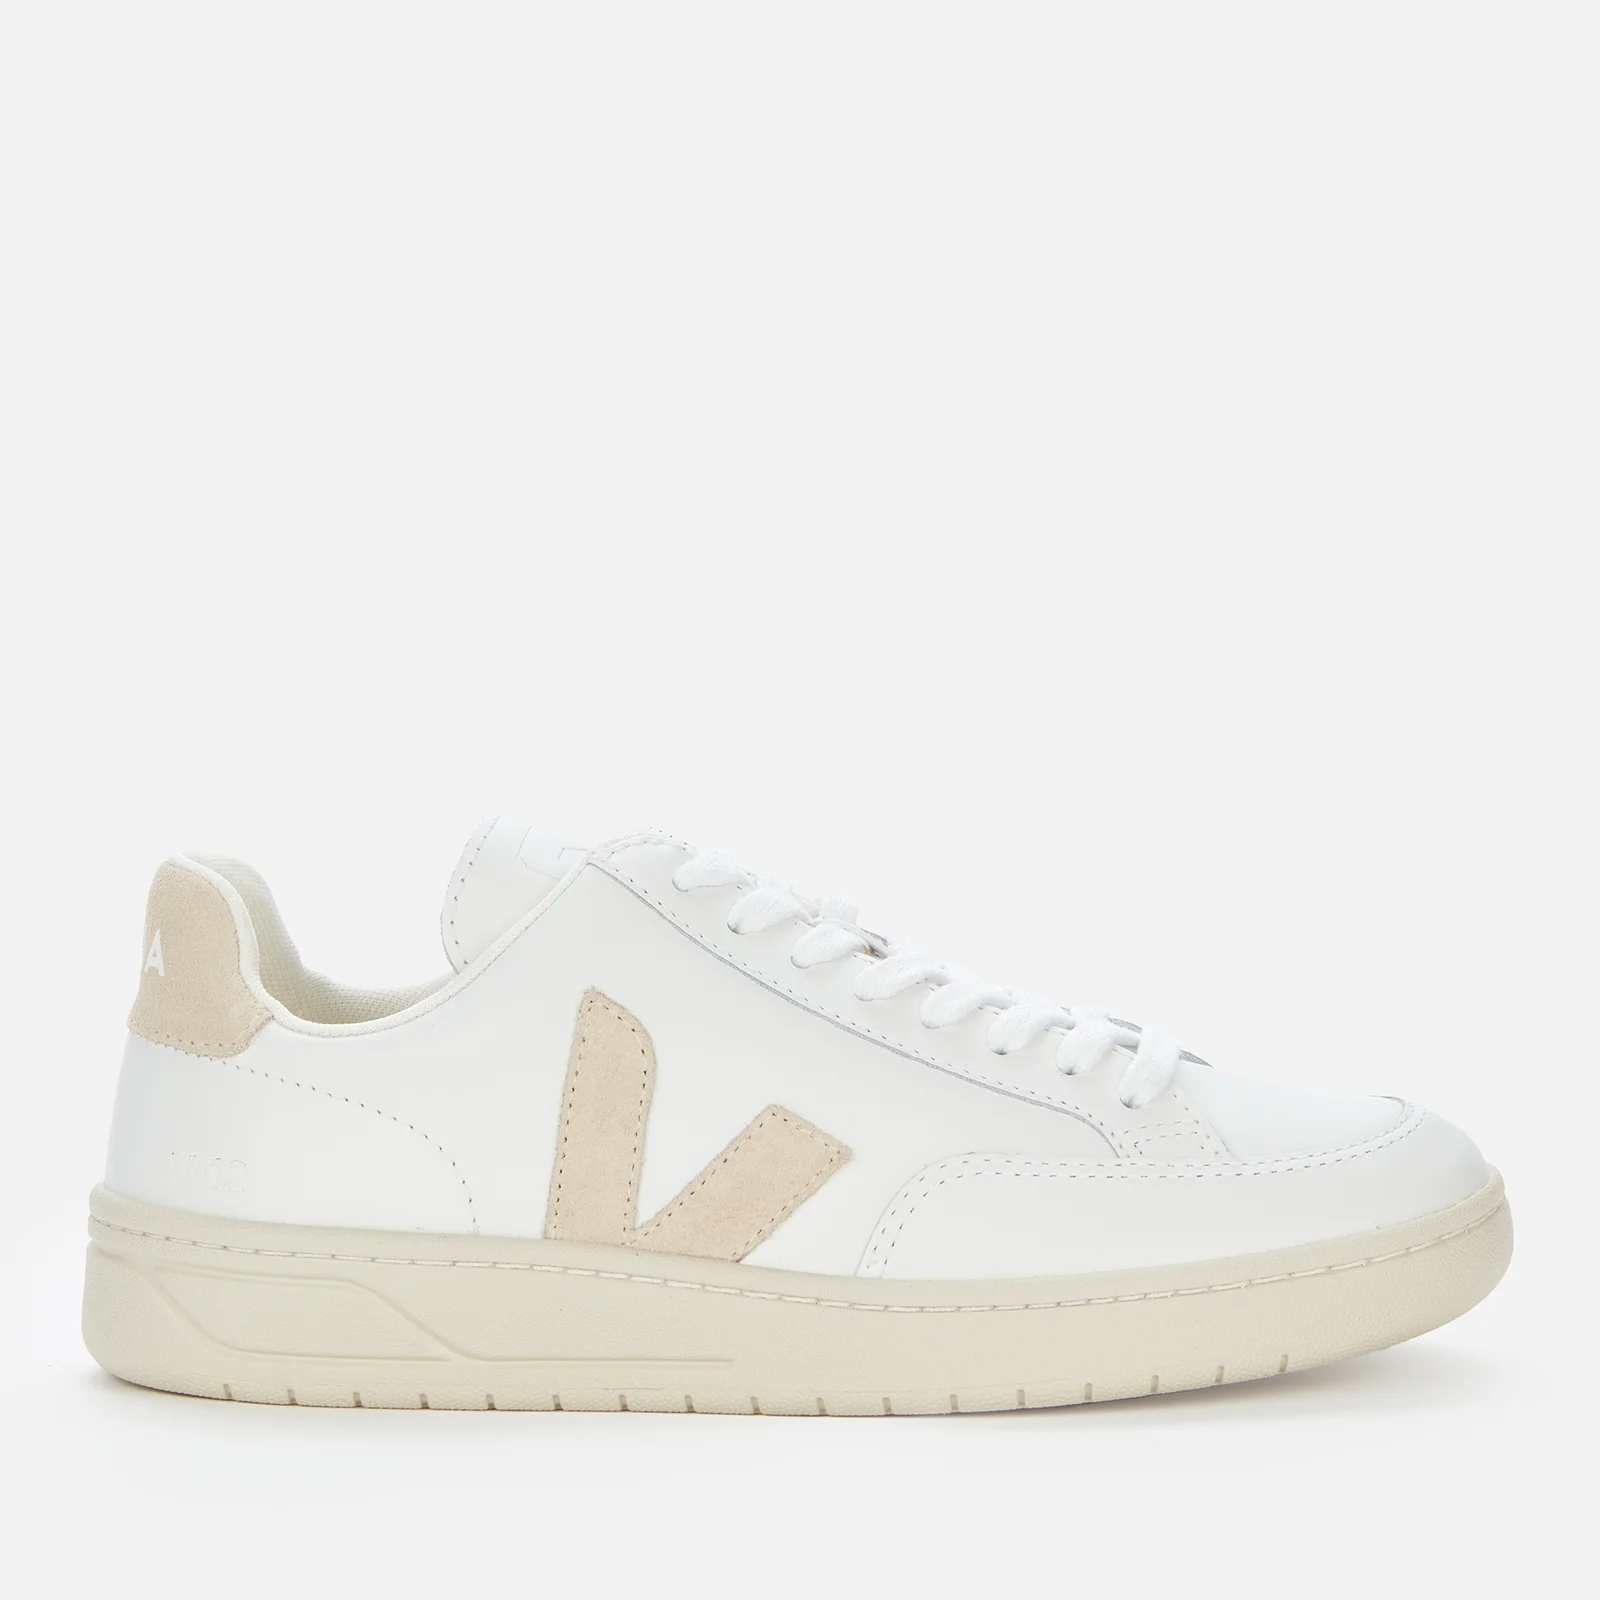 Veja Women's V-12 Leather Trainers - Extra White/Sable Image 1